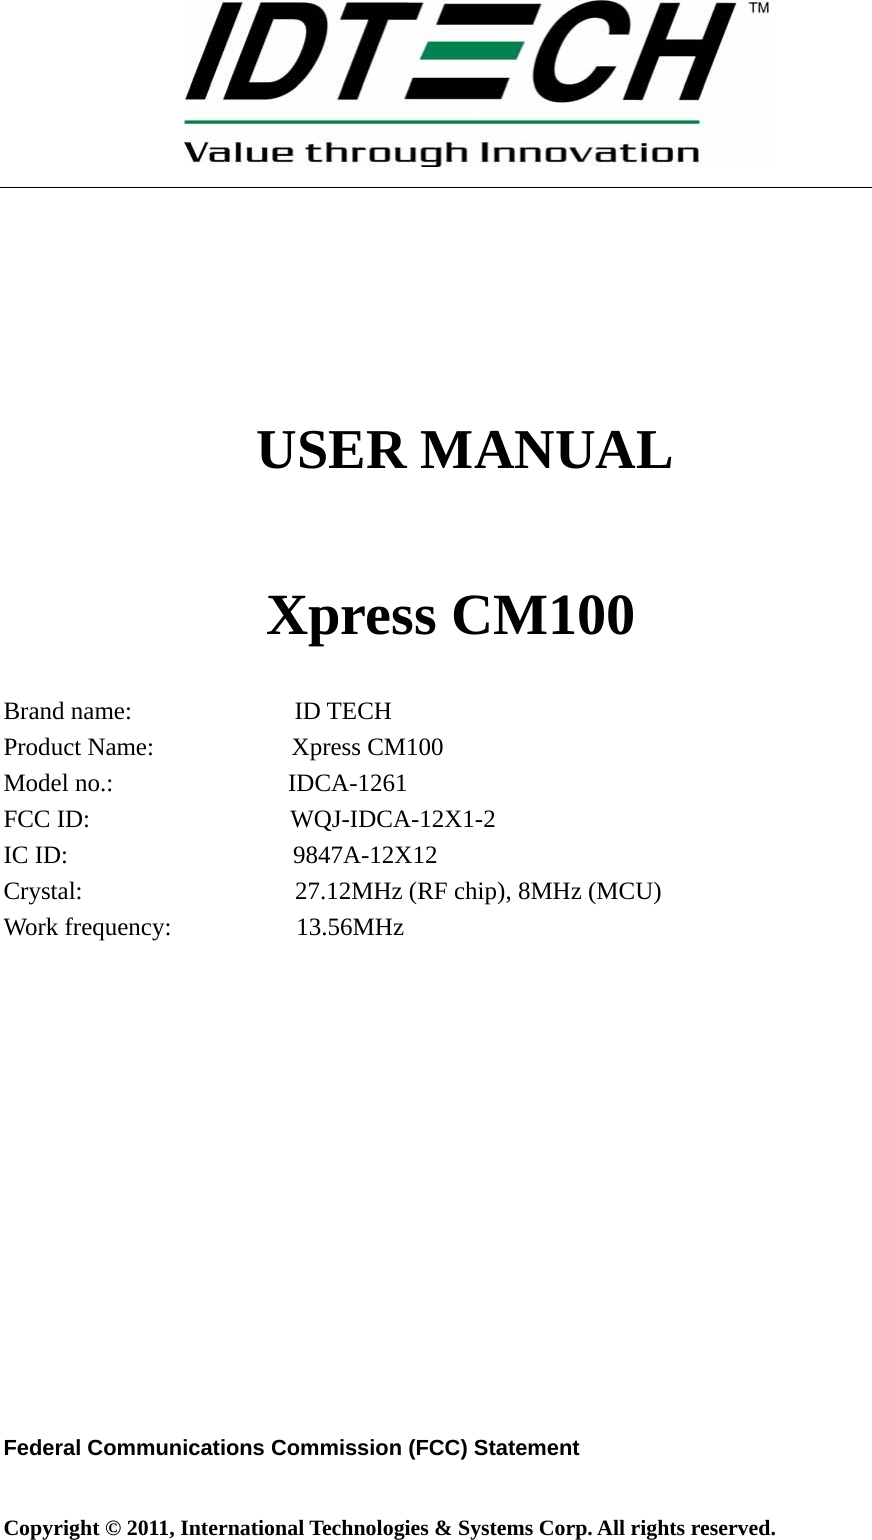 Copyright © 2011, International Technologies &amp; Systems Corp. All rights reserved.     USER MANUAL     Xpress CM100  Brand name:             ID TECH Product Name:           Xpress CM100 Model no.:              IDCA-1261 FCC ID:                WQJ-IDCA-12X1-2 IC ID:                  9847A-12X12 Crystal:                 27.12MHz (RF chip), 8MHz (MCU) Work frequency:          13.56MHz                Federal Communications Commission (FCC) Statement  